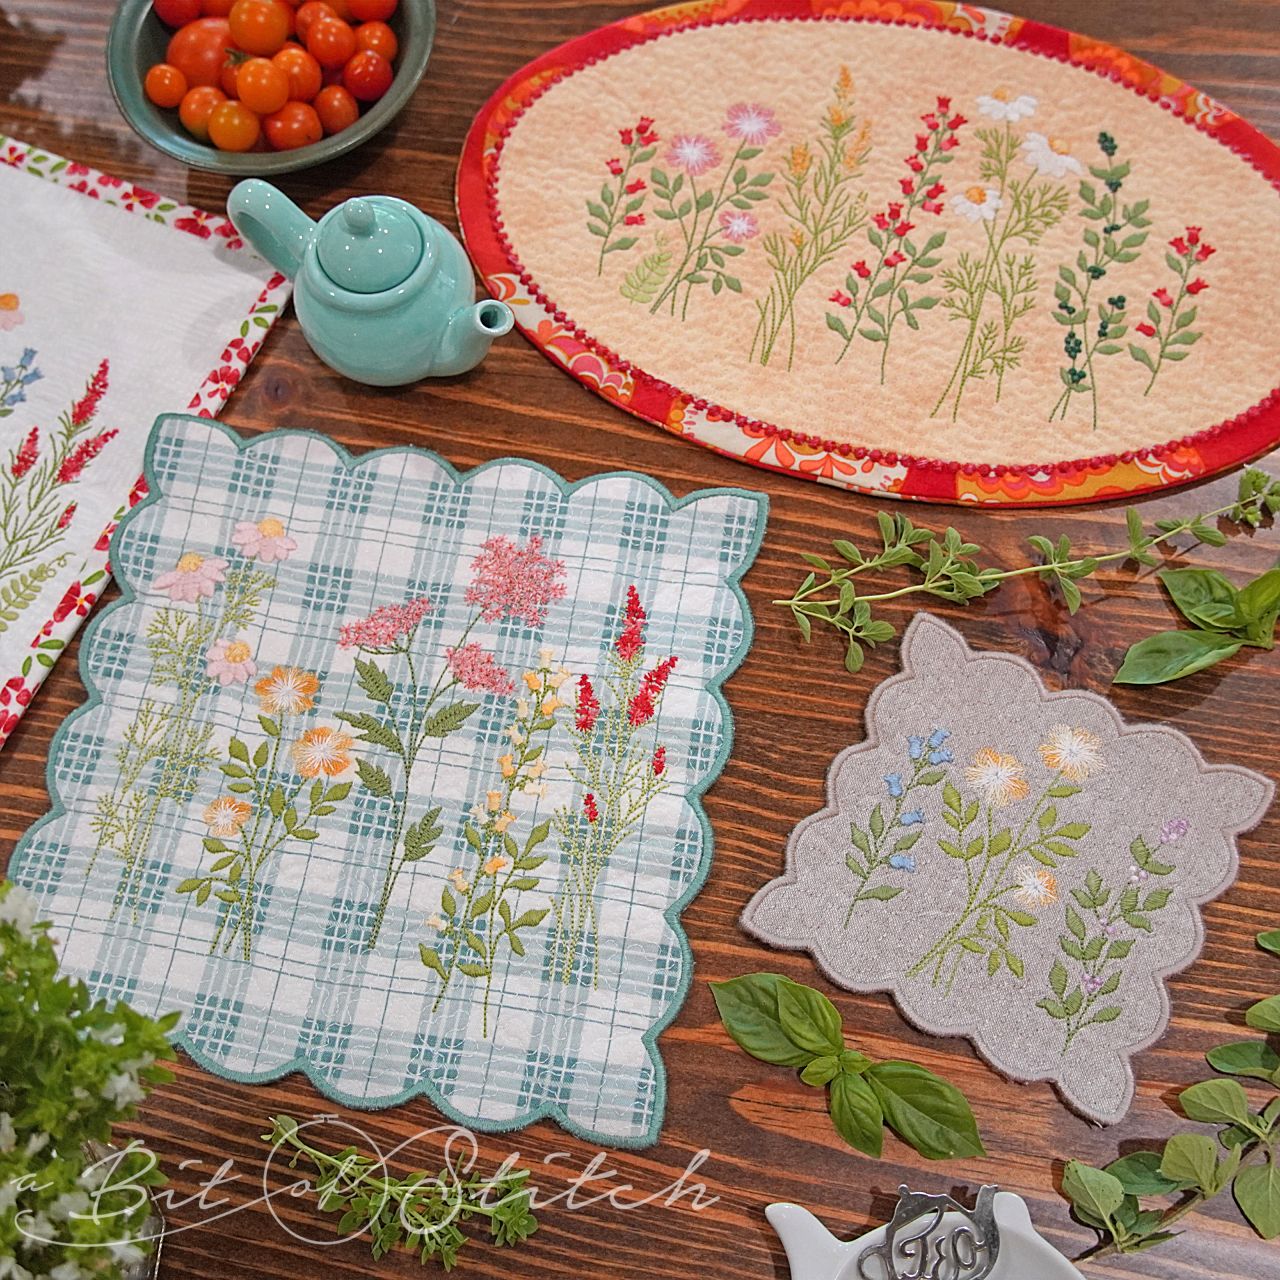 Meadow Flowers wildflower floral machine embroidery designs by A Bit of Stitch on made-in-the-hoop table doilies